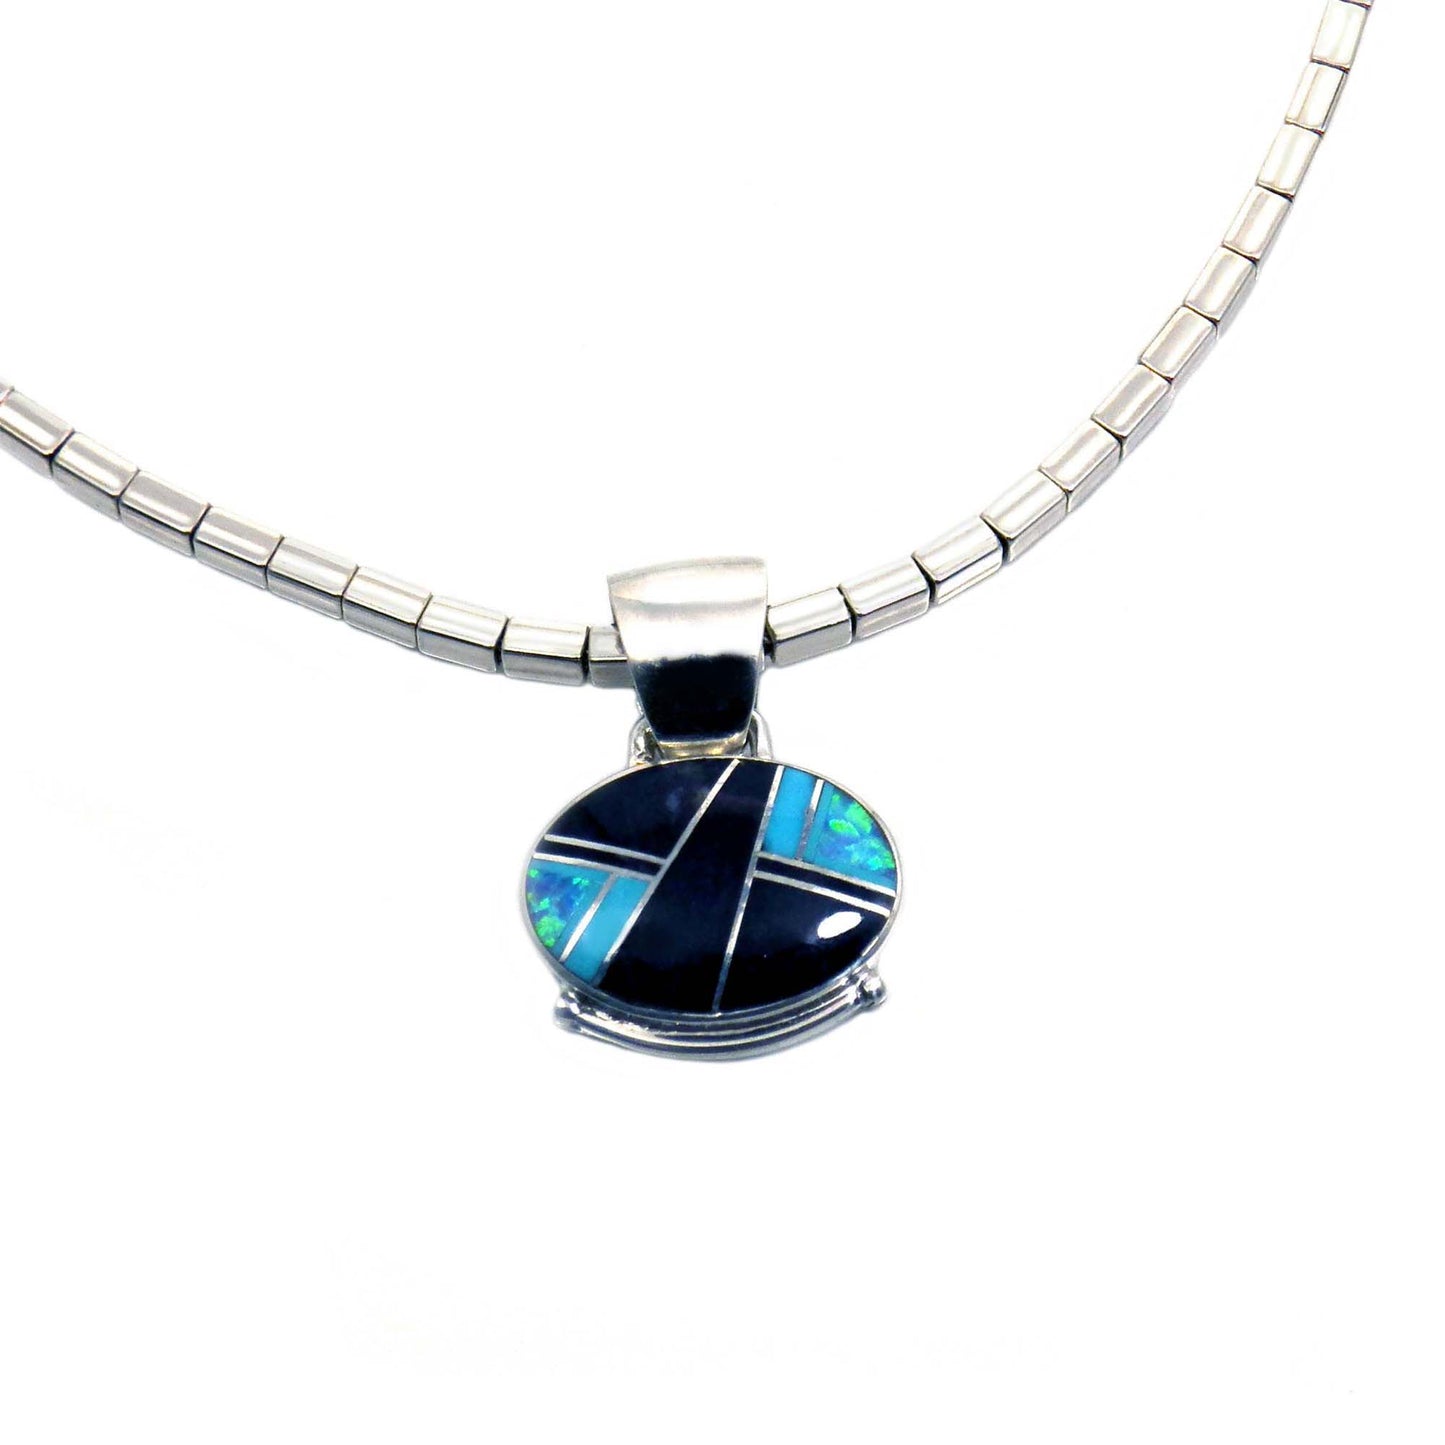 Stone inlay Navajo necklace by artisan Cathy Webster